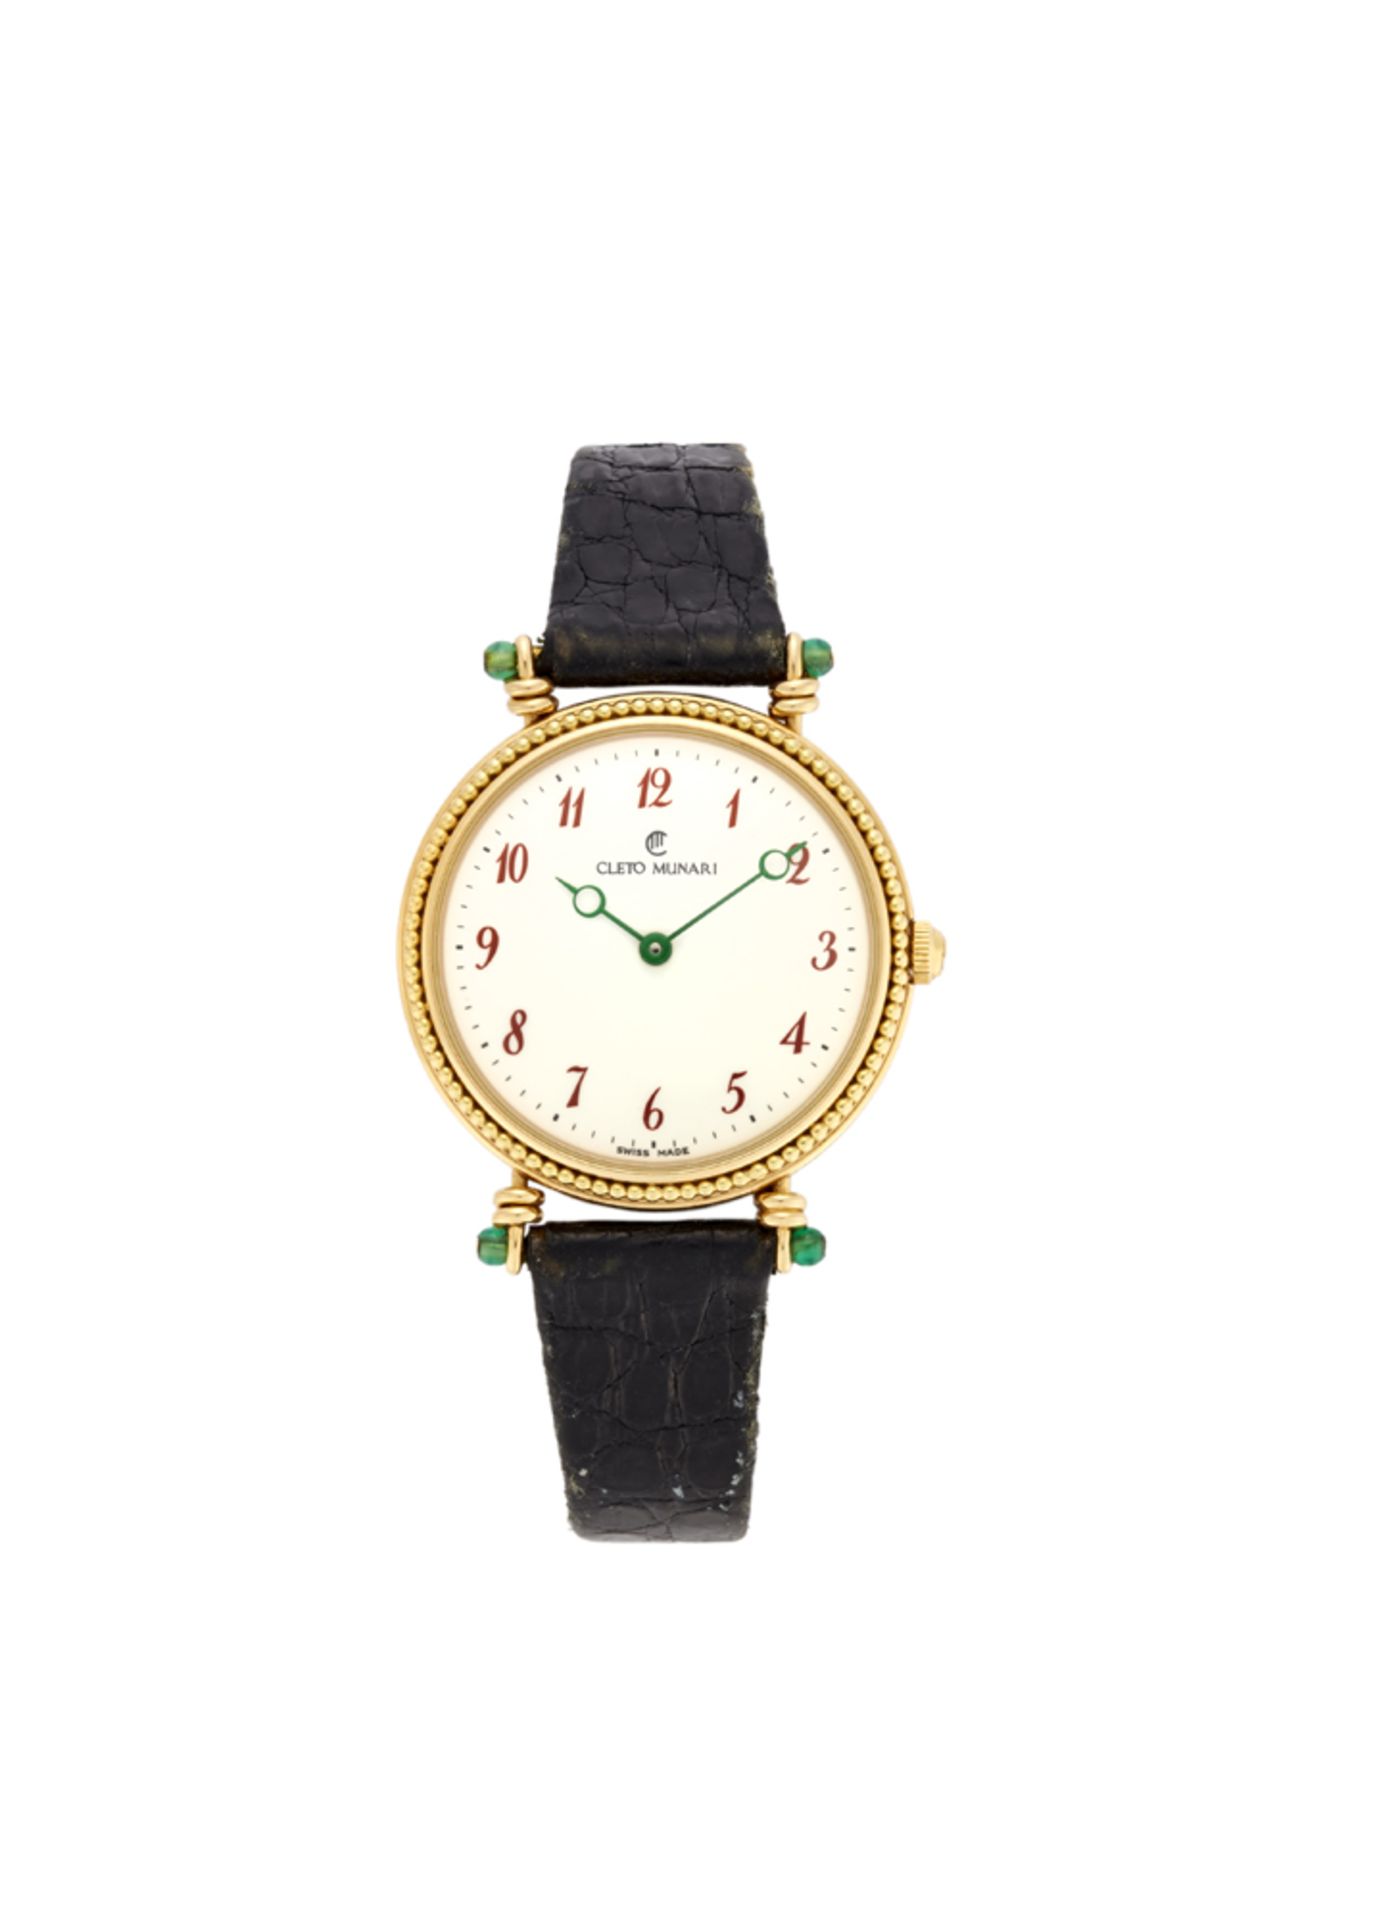 CLETO MUNARI MICHAEL GRAVES<br>Lady's 18K gold wristwatch<br>1980s<br>Dial and case signed<br>Automa